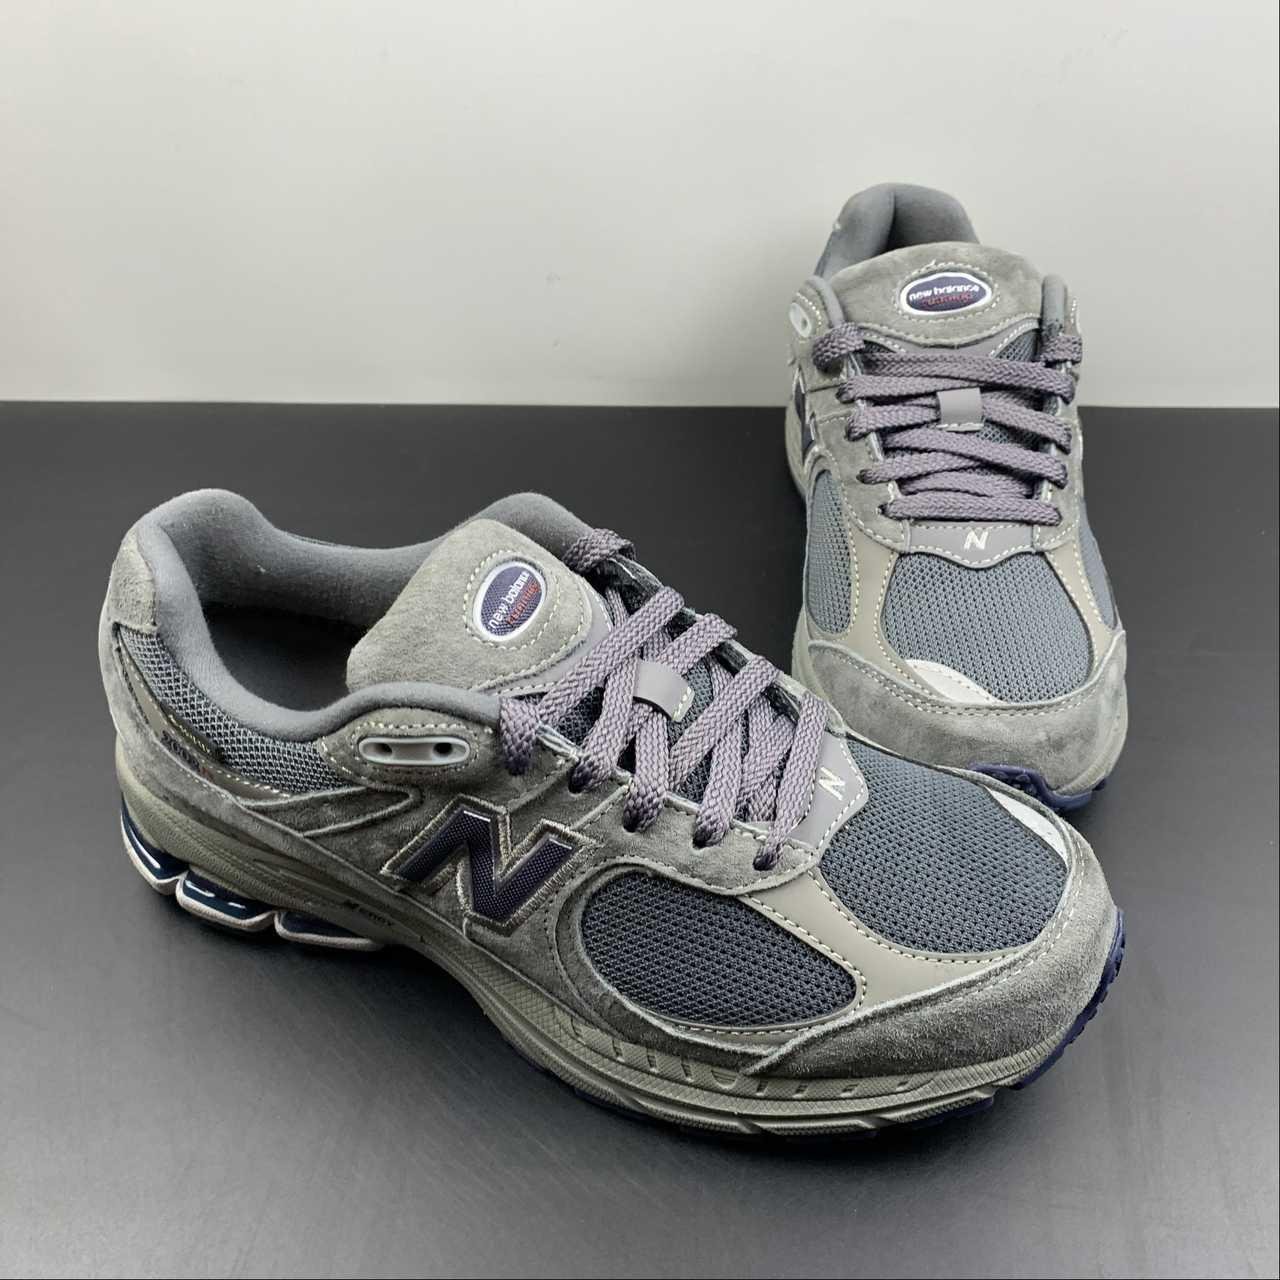             NB2002 Cushion-Shock Breathable Running Shoes M2002RX